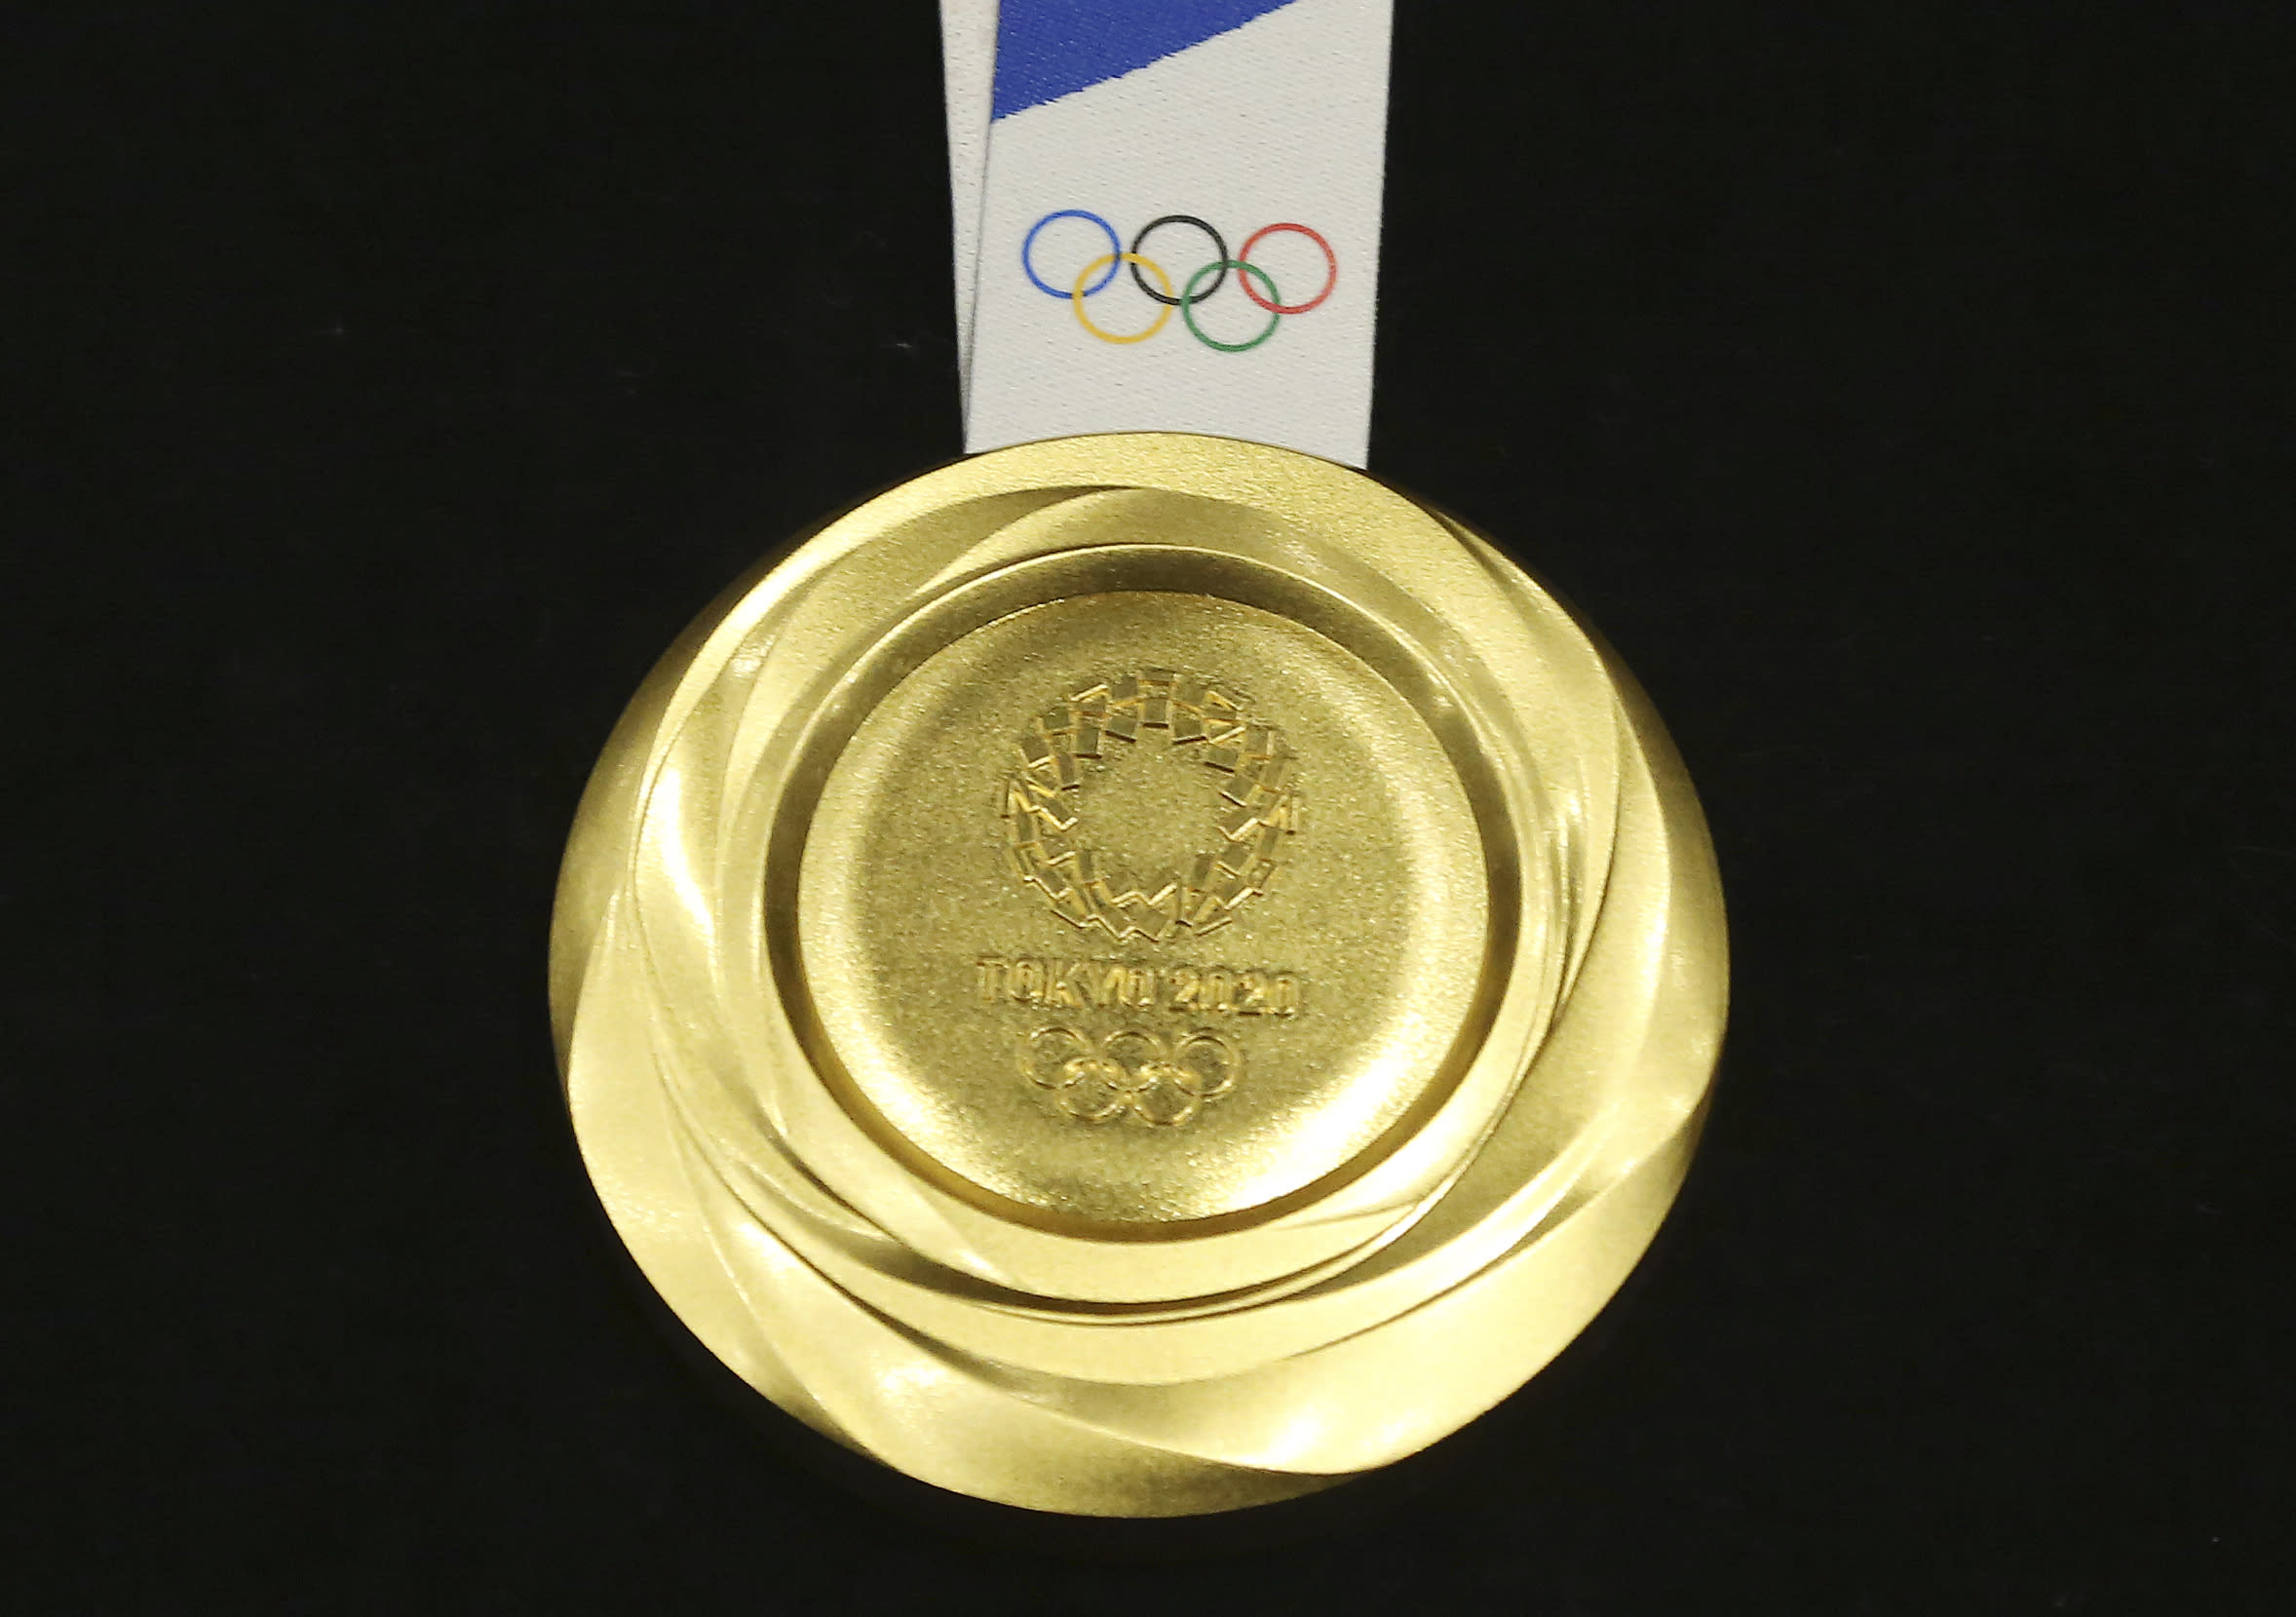 1 Year Tokyo Olympics unveil gold, silver, bronze medals